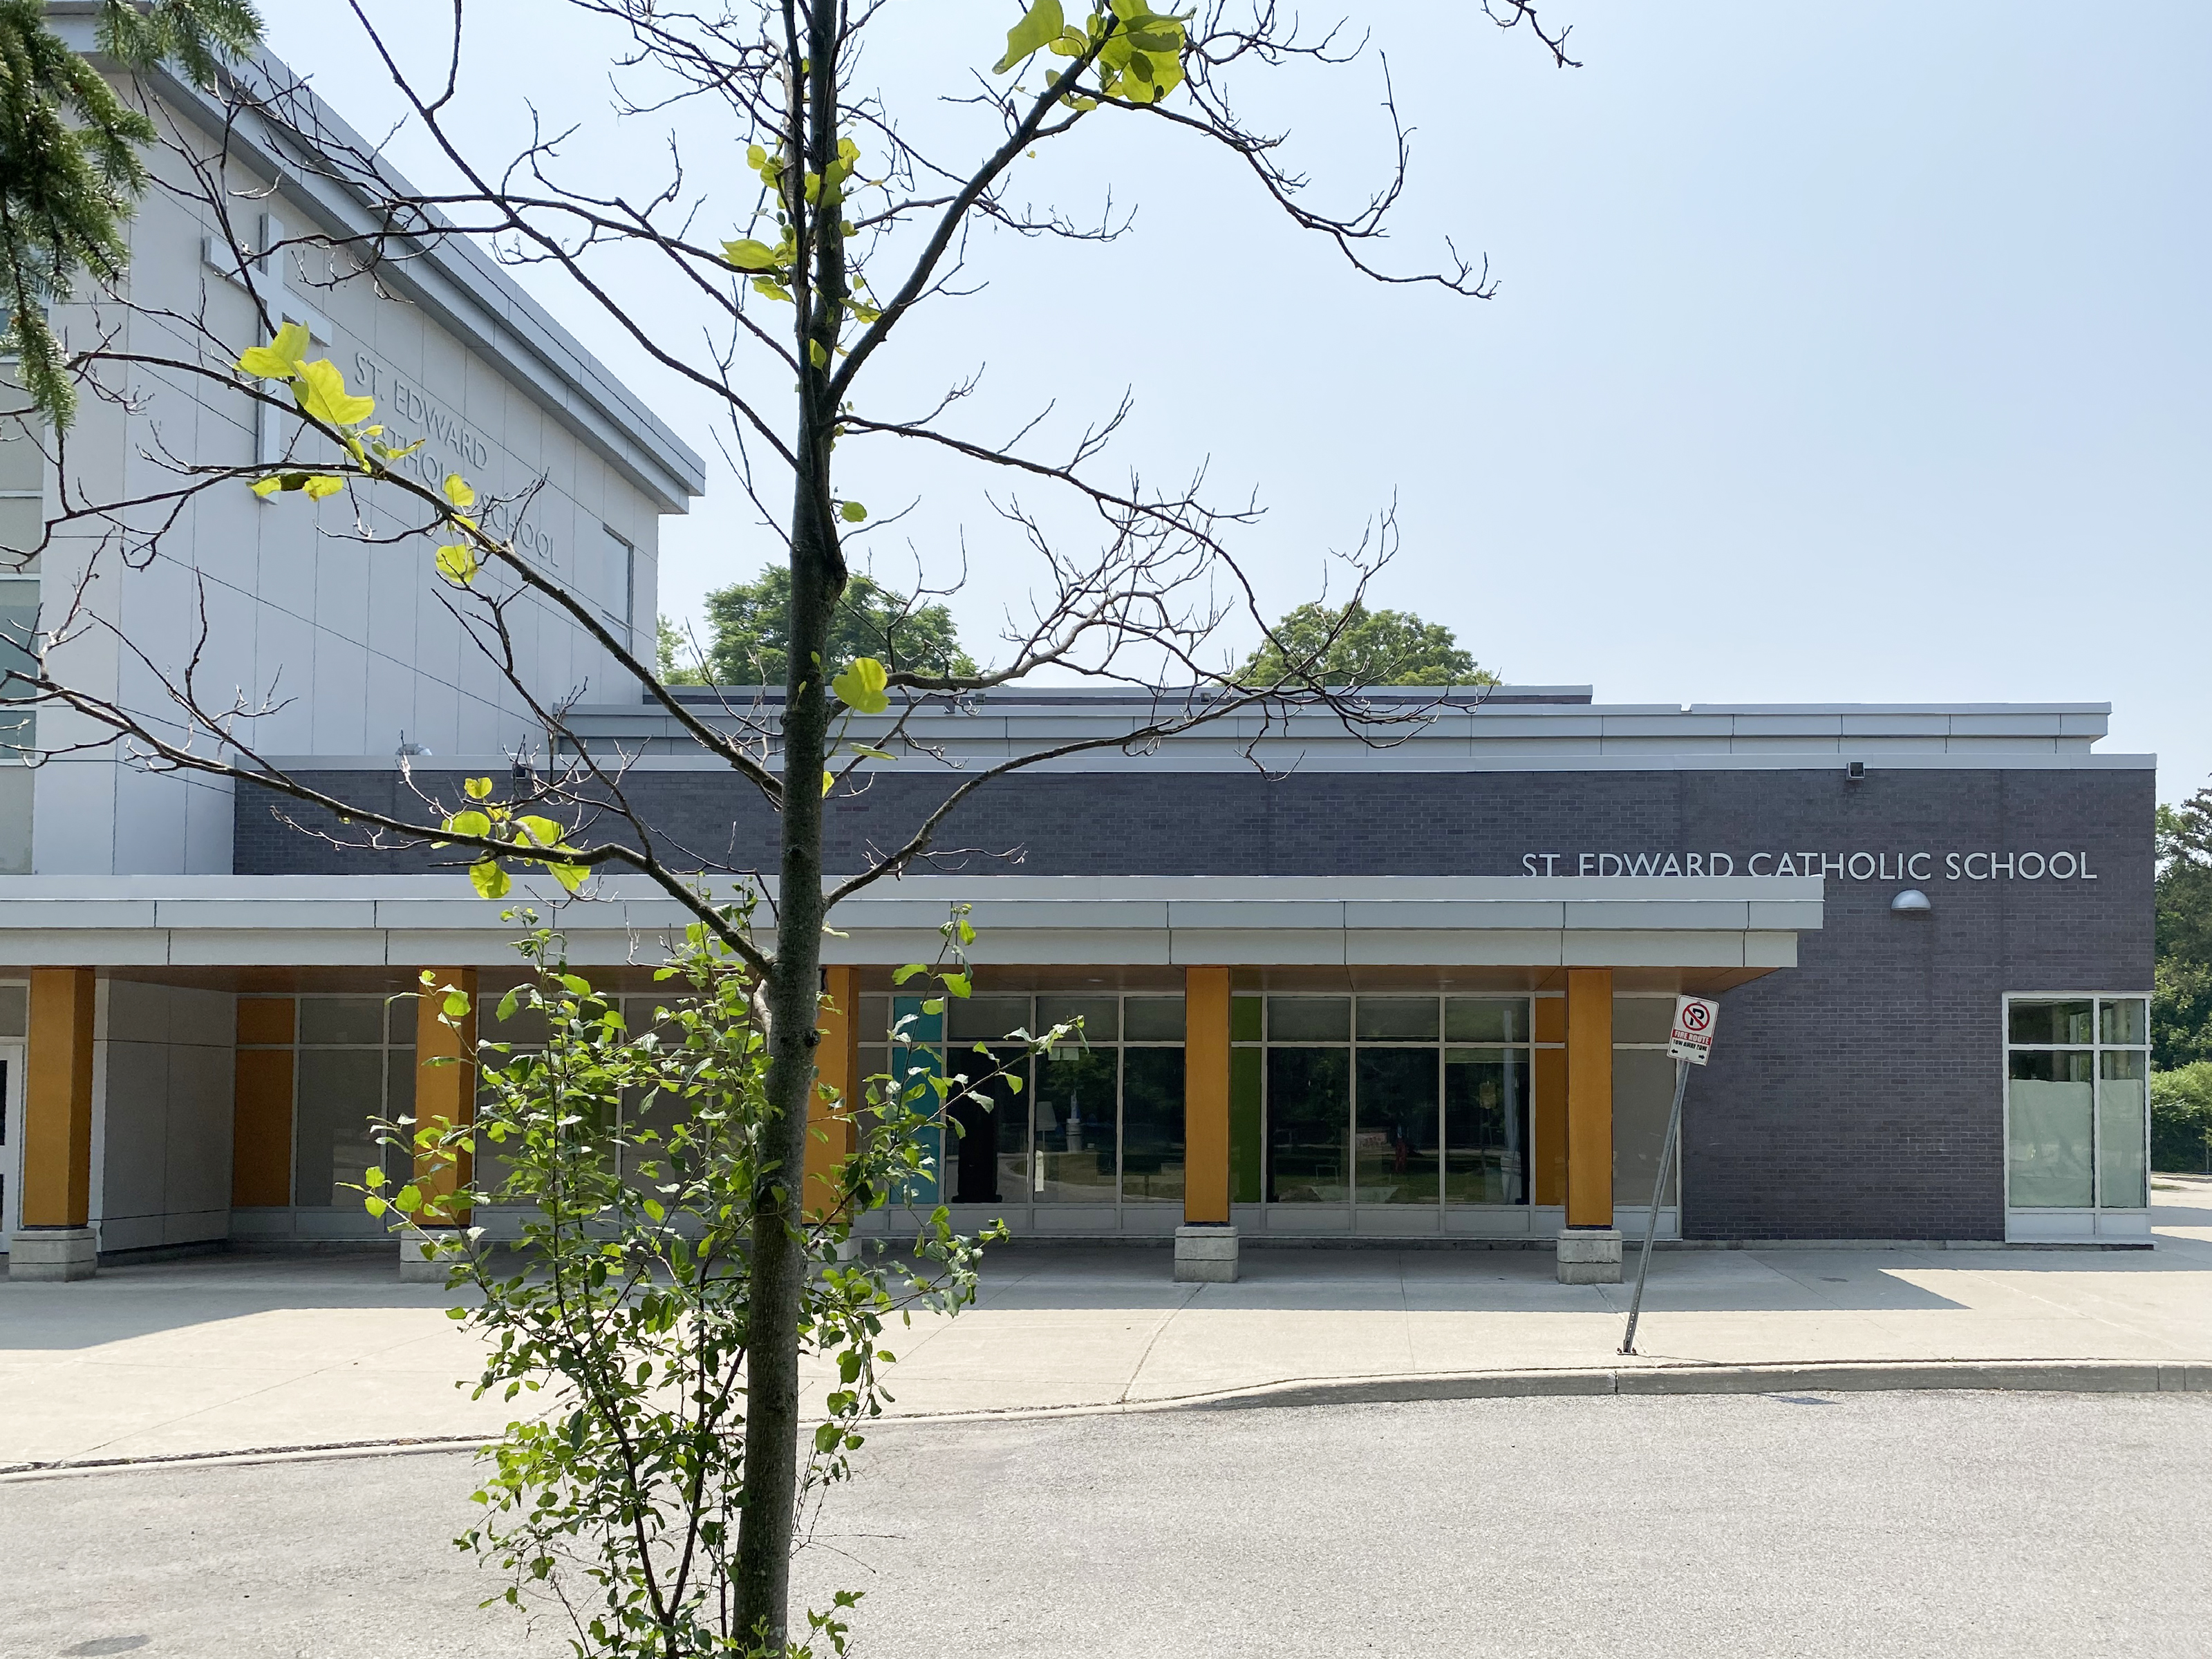 The front of the school building